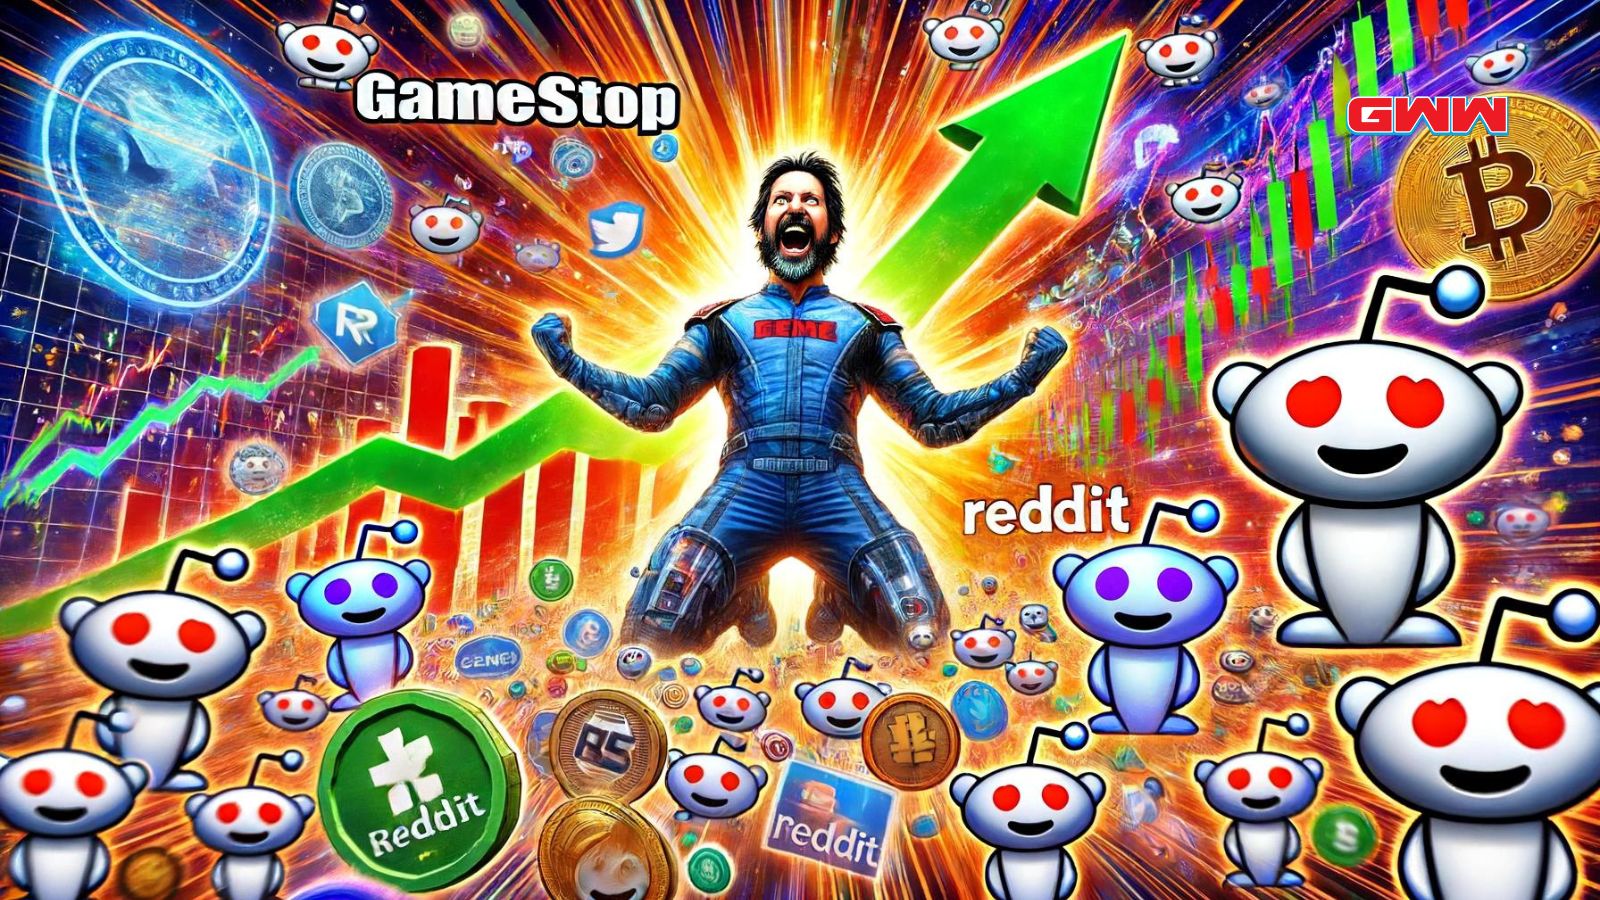 Explosive growth with Reddit and GameStop logos, stock market graphics